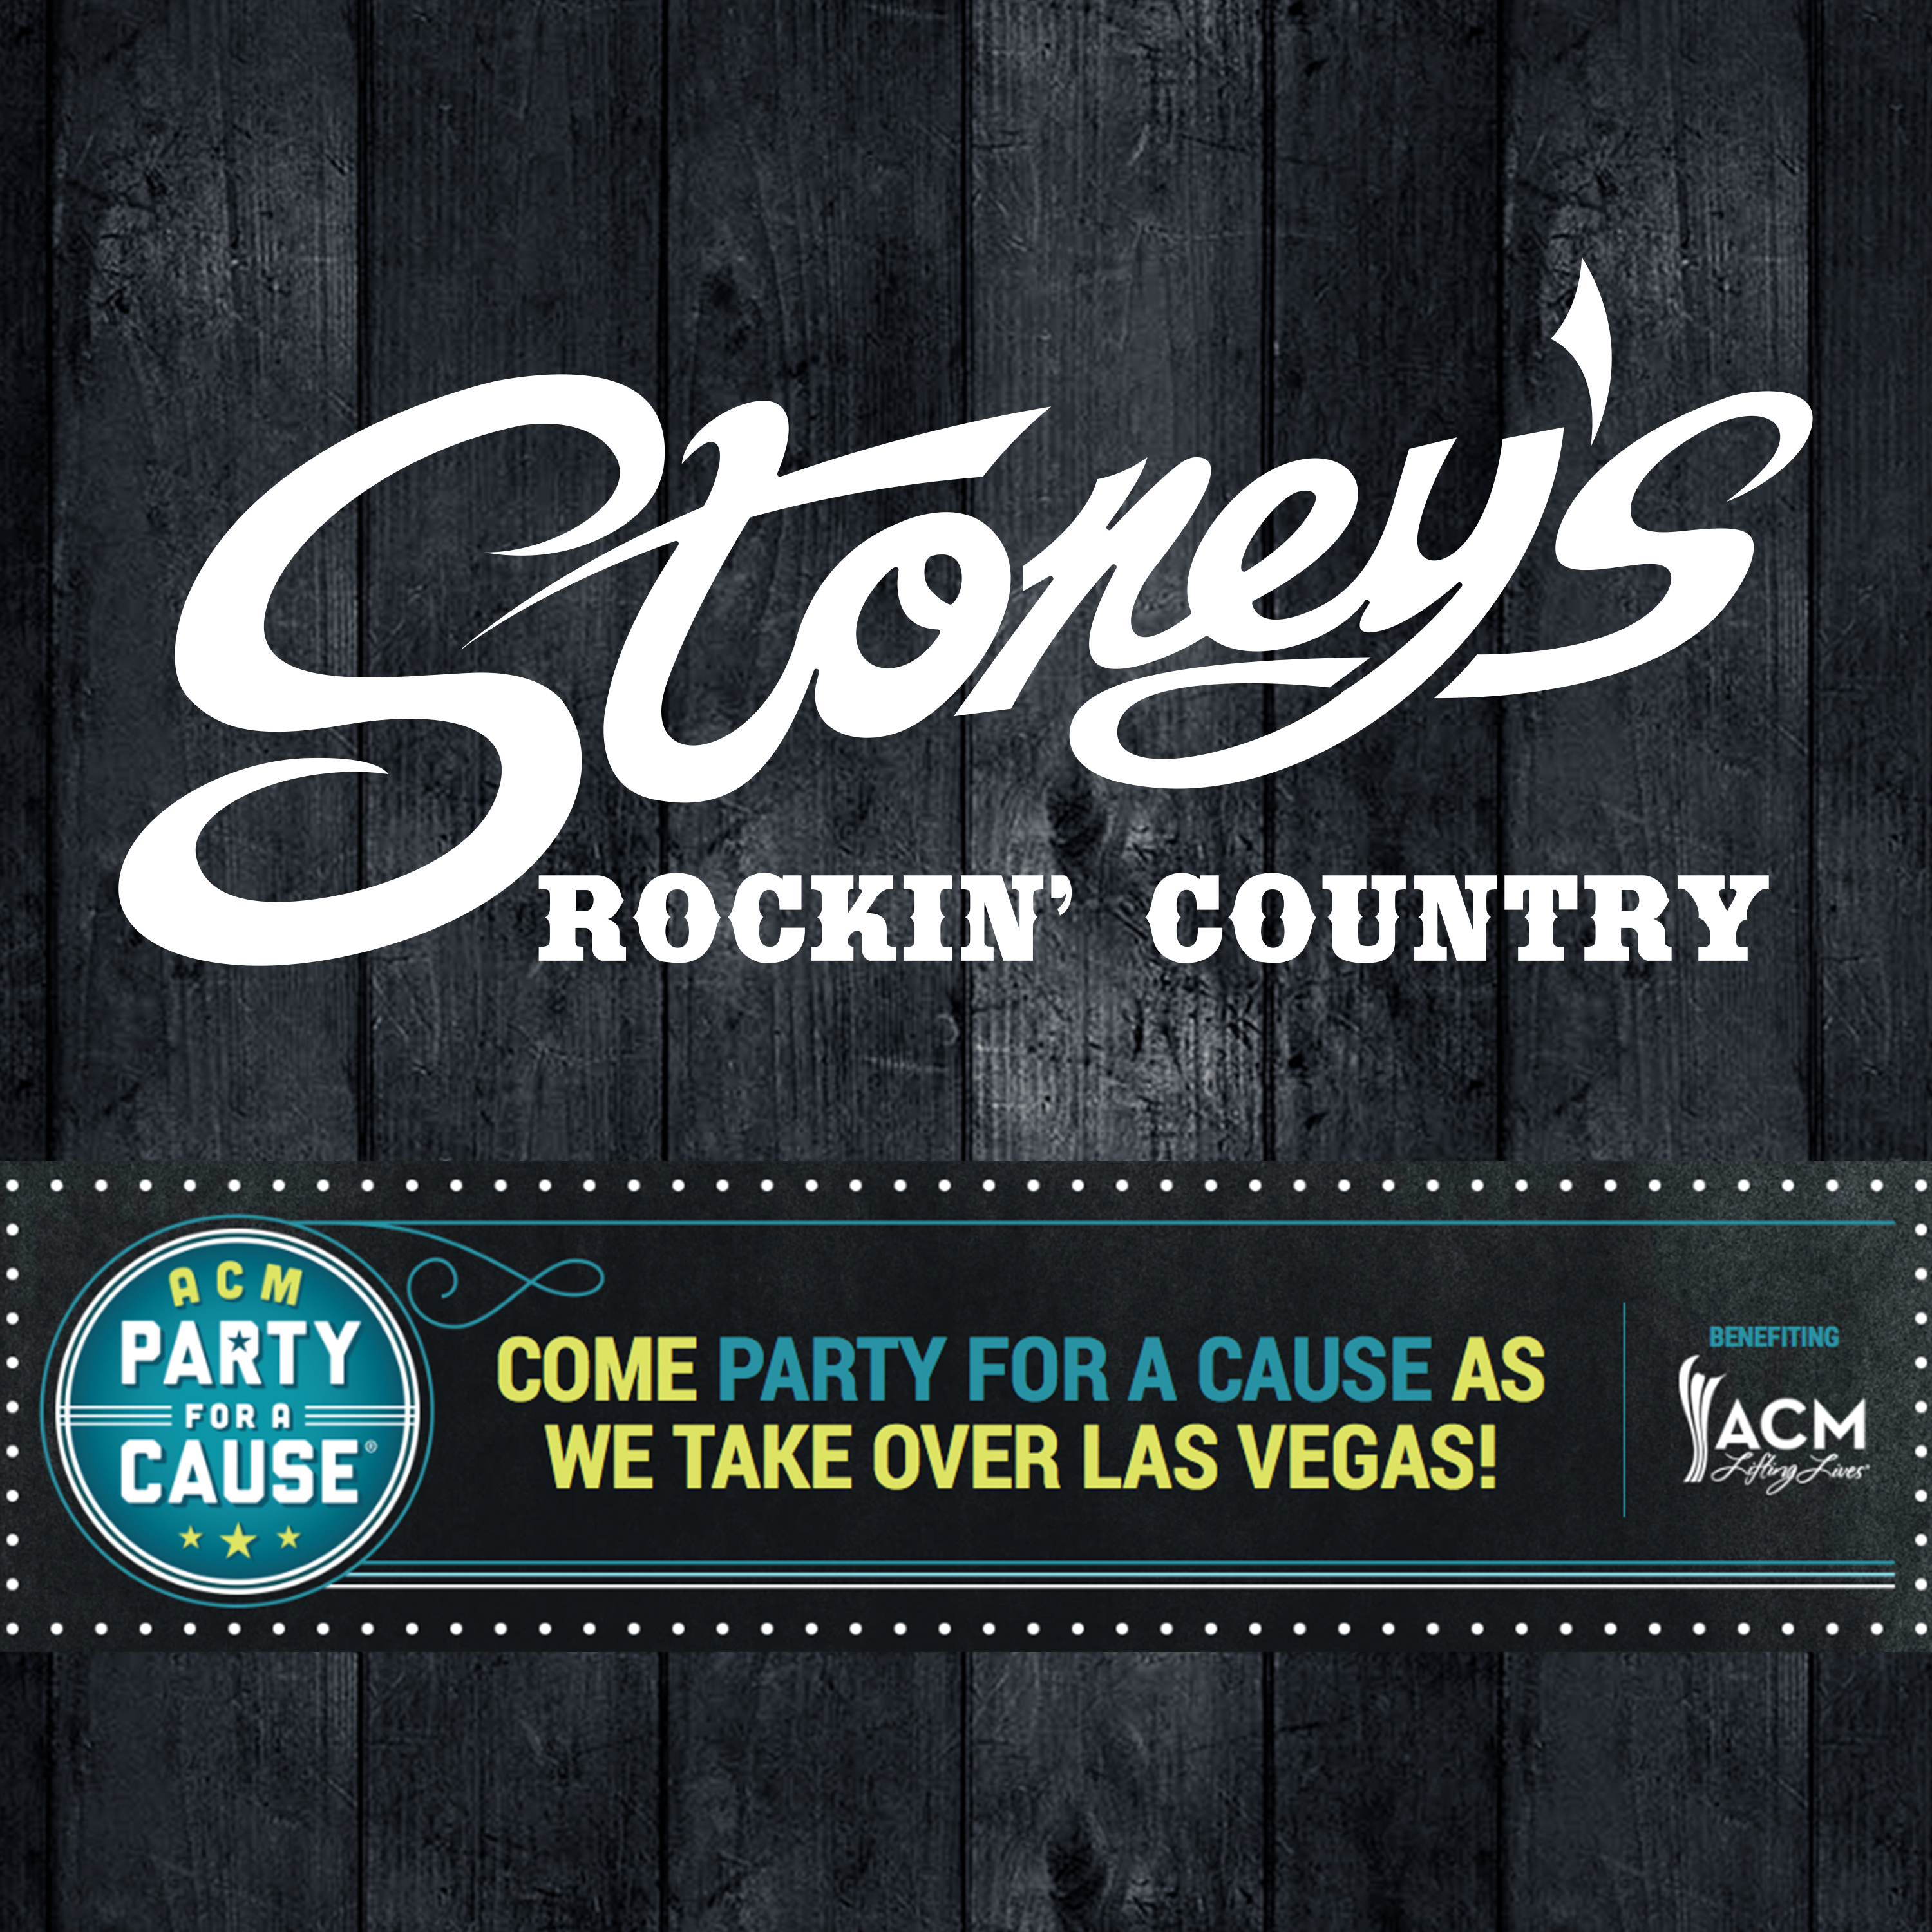 ACM Party for a Cause: Tailgate Party presented by Country Rebel at Stoney’s Rockin’ Country